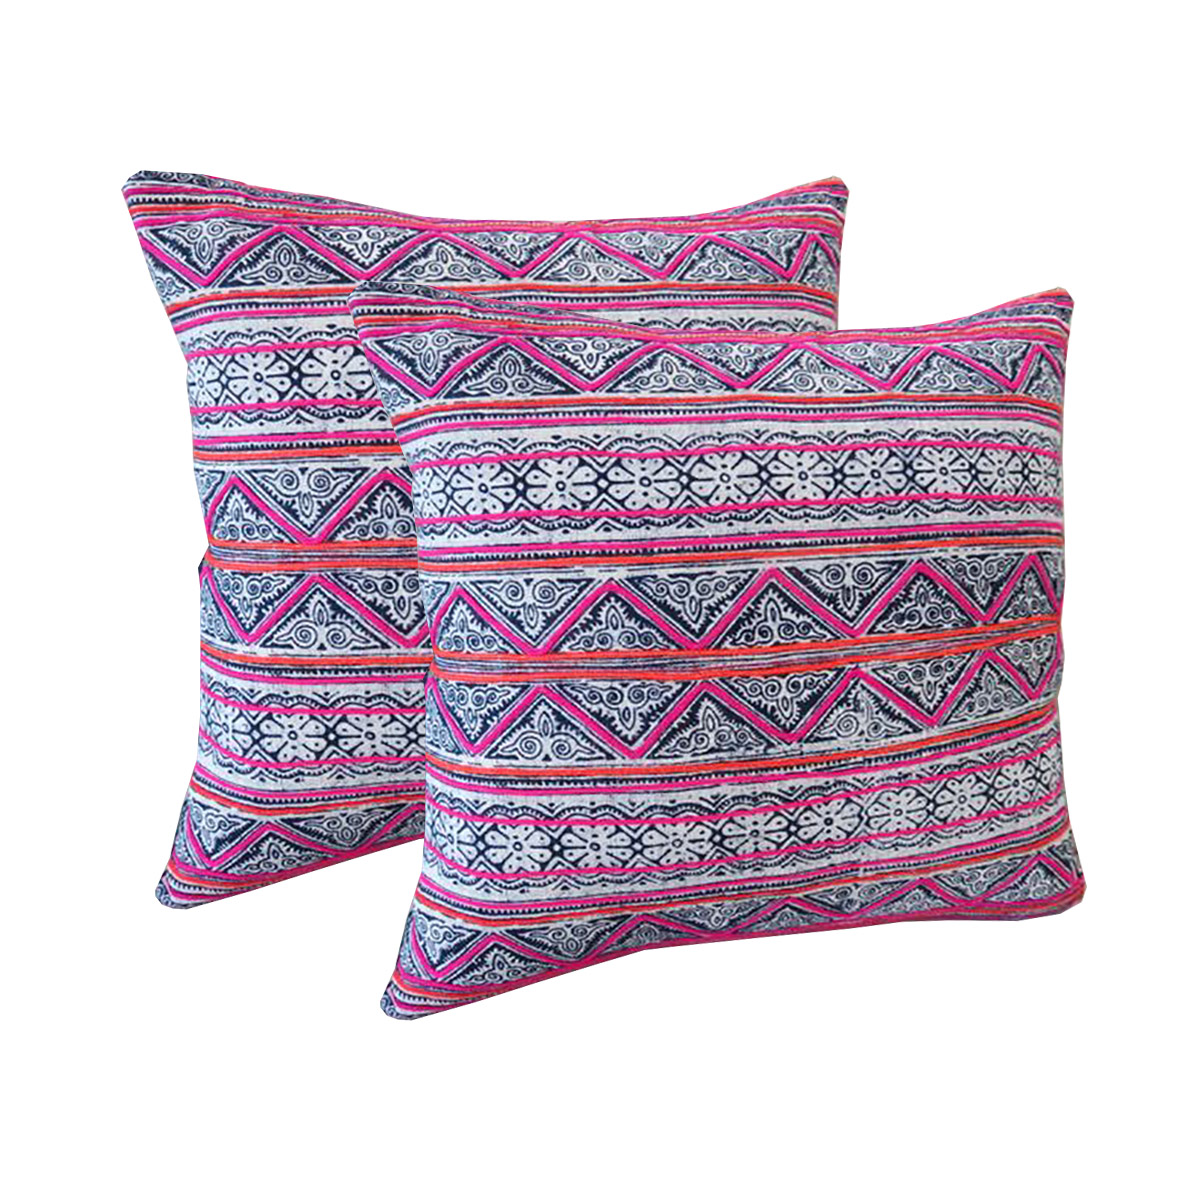 Luxury and pretty  pillow  cushion From Chiang Mai Thailand. Cotton woven slight pattern and pretty detail The Chiang Mai pillow cover